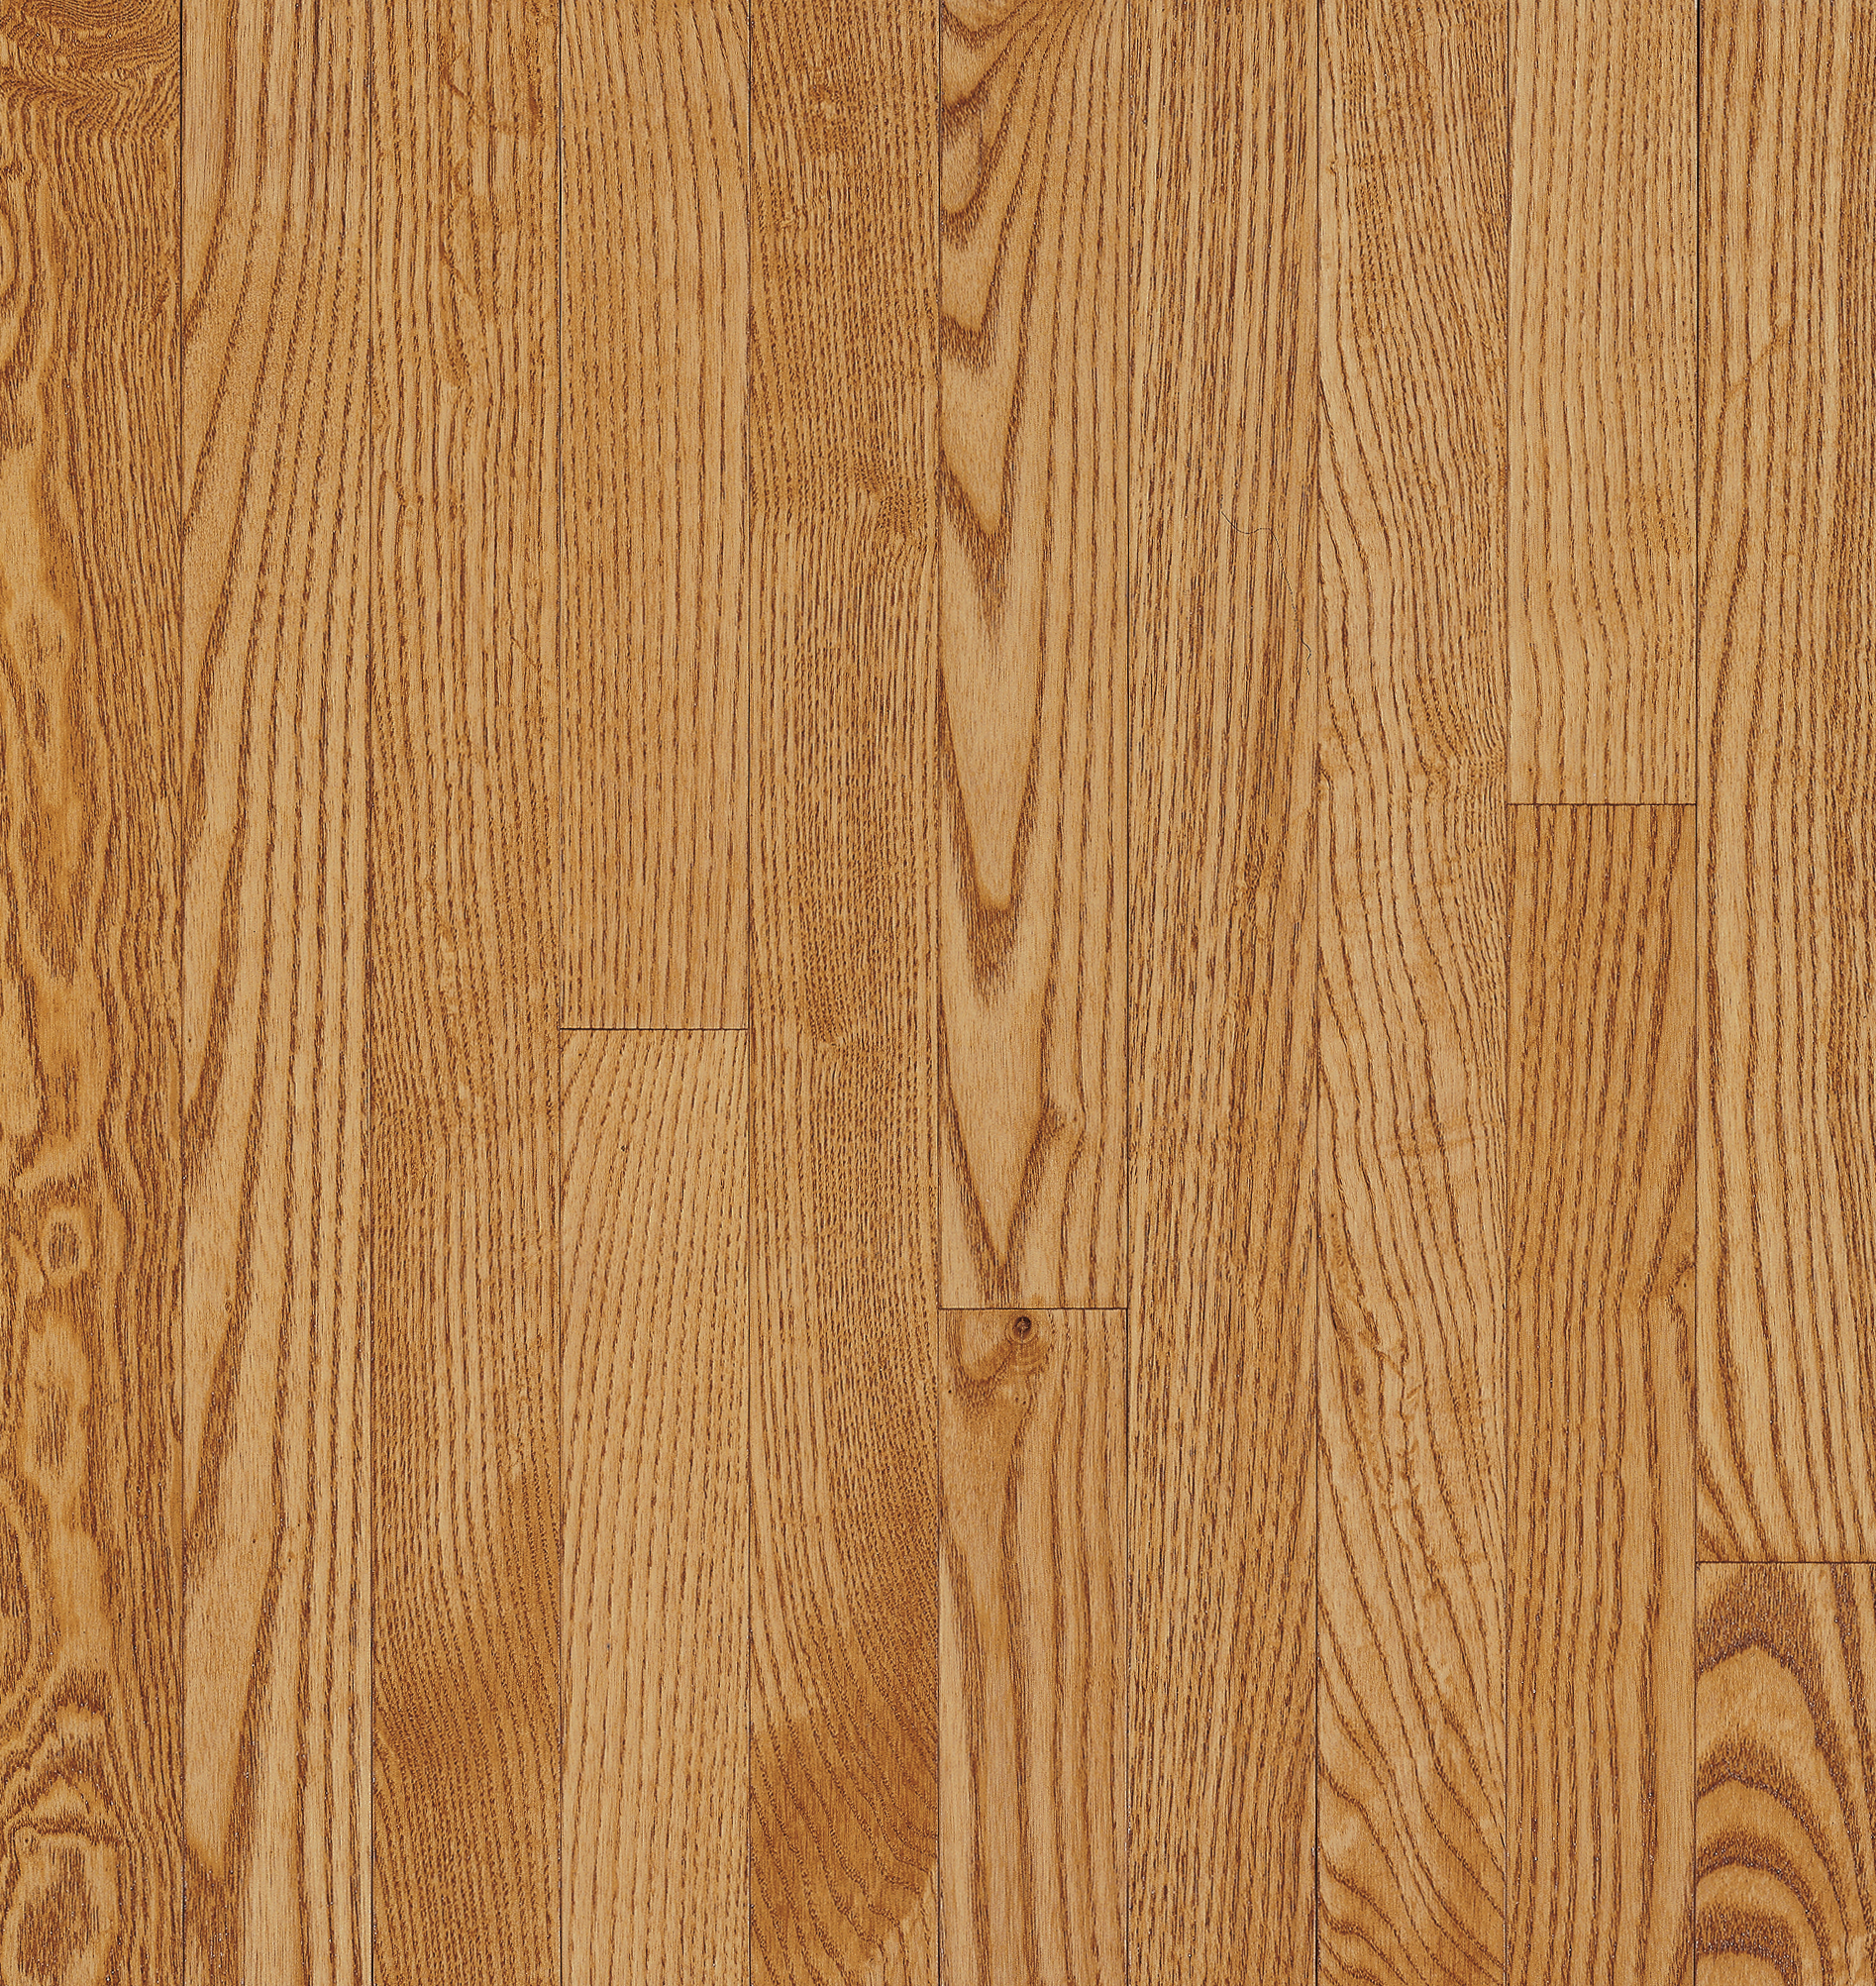 Dundee Spice Solid Hardwood CB214